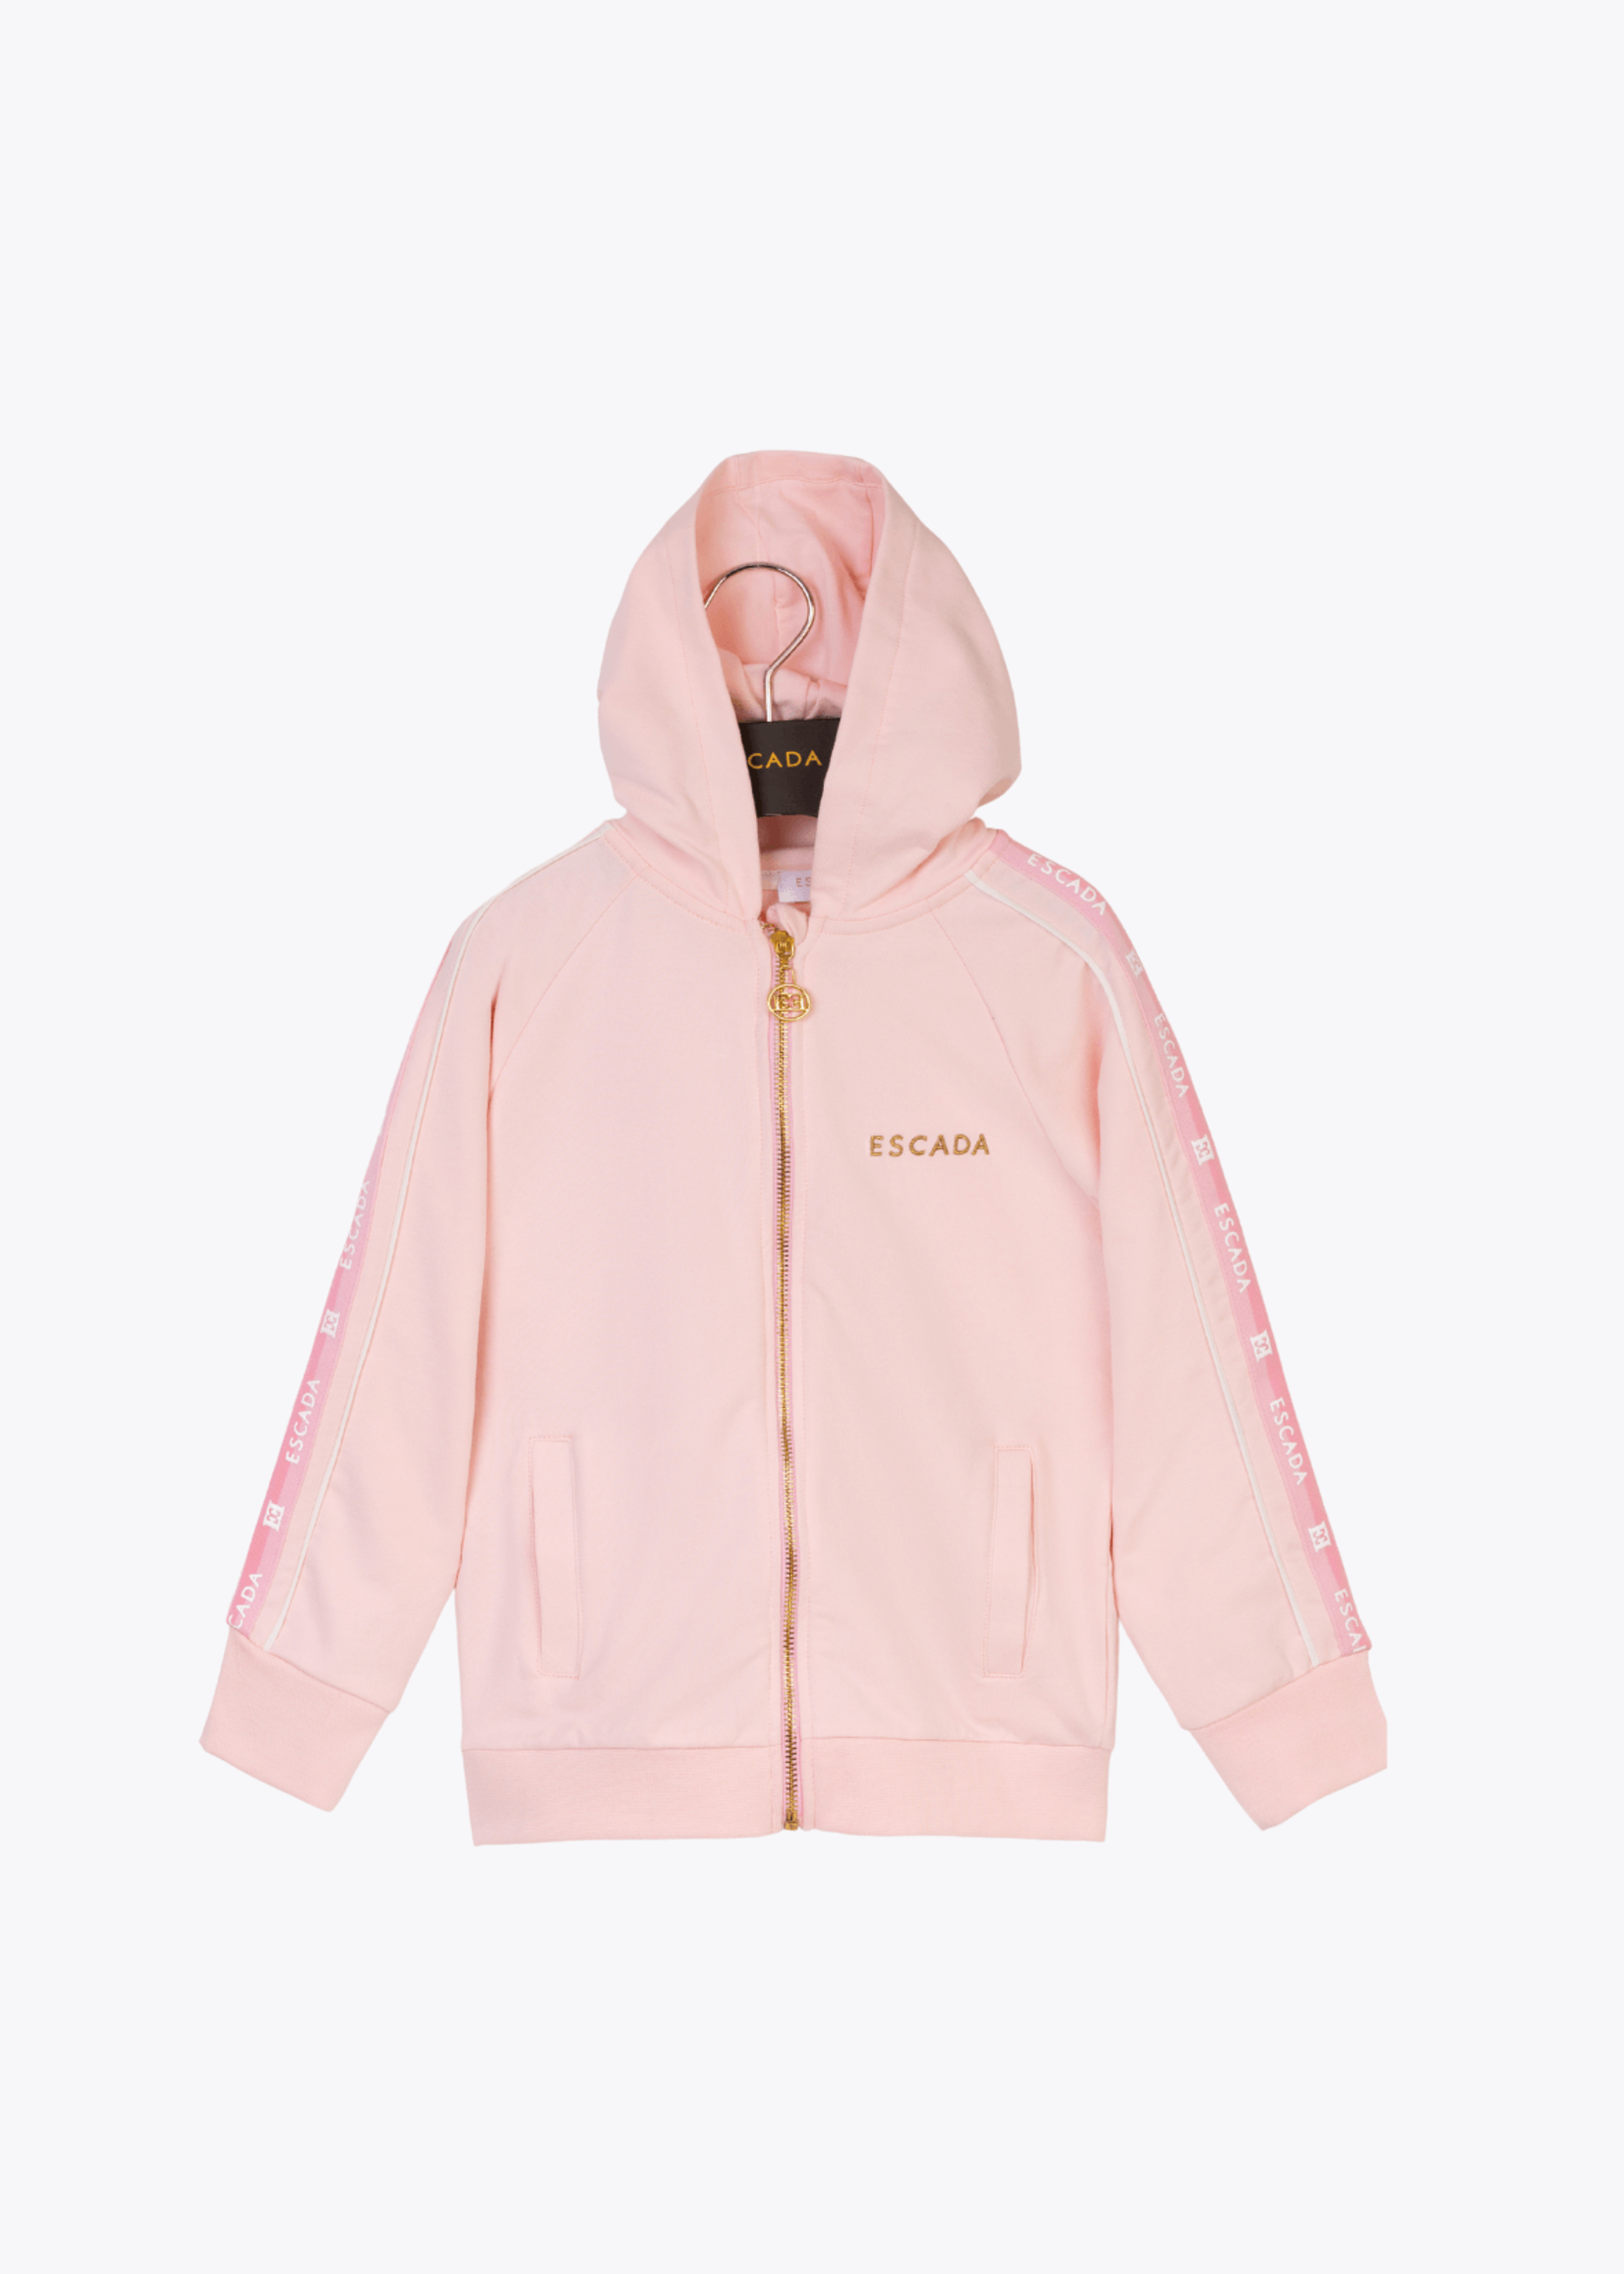 Escada Hooded sweater with zip fastening in pink for girls from Escada.